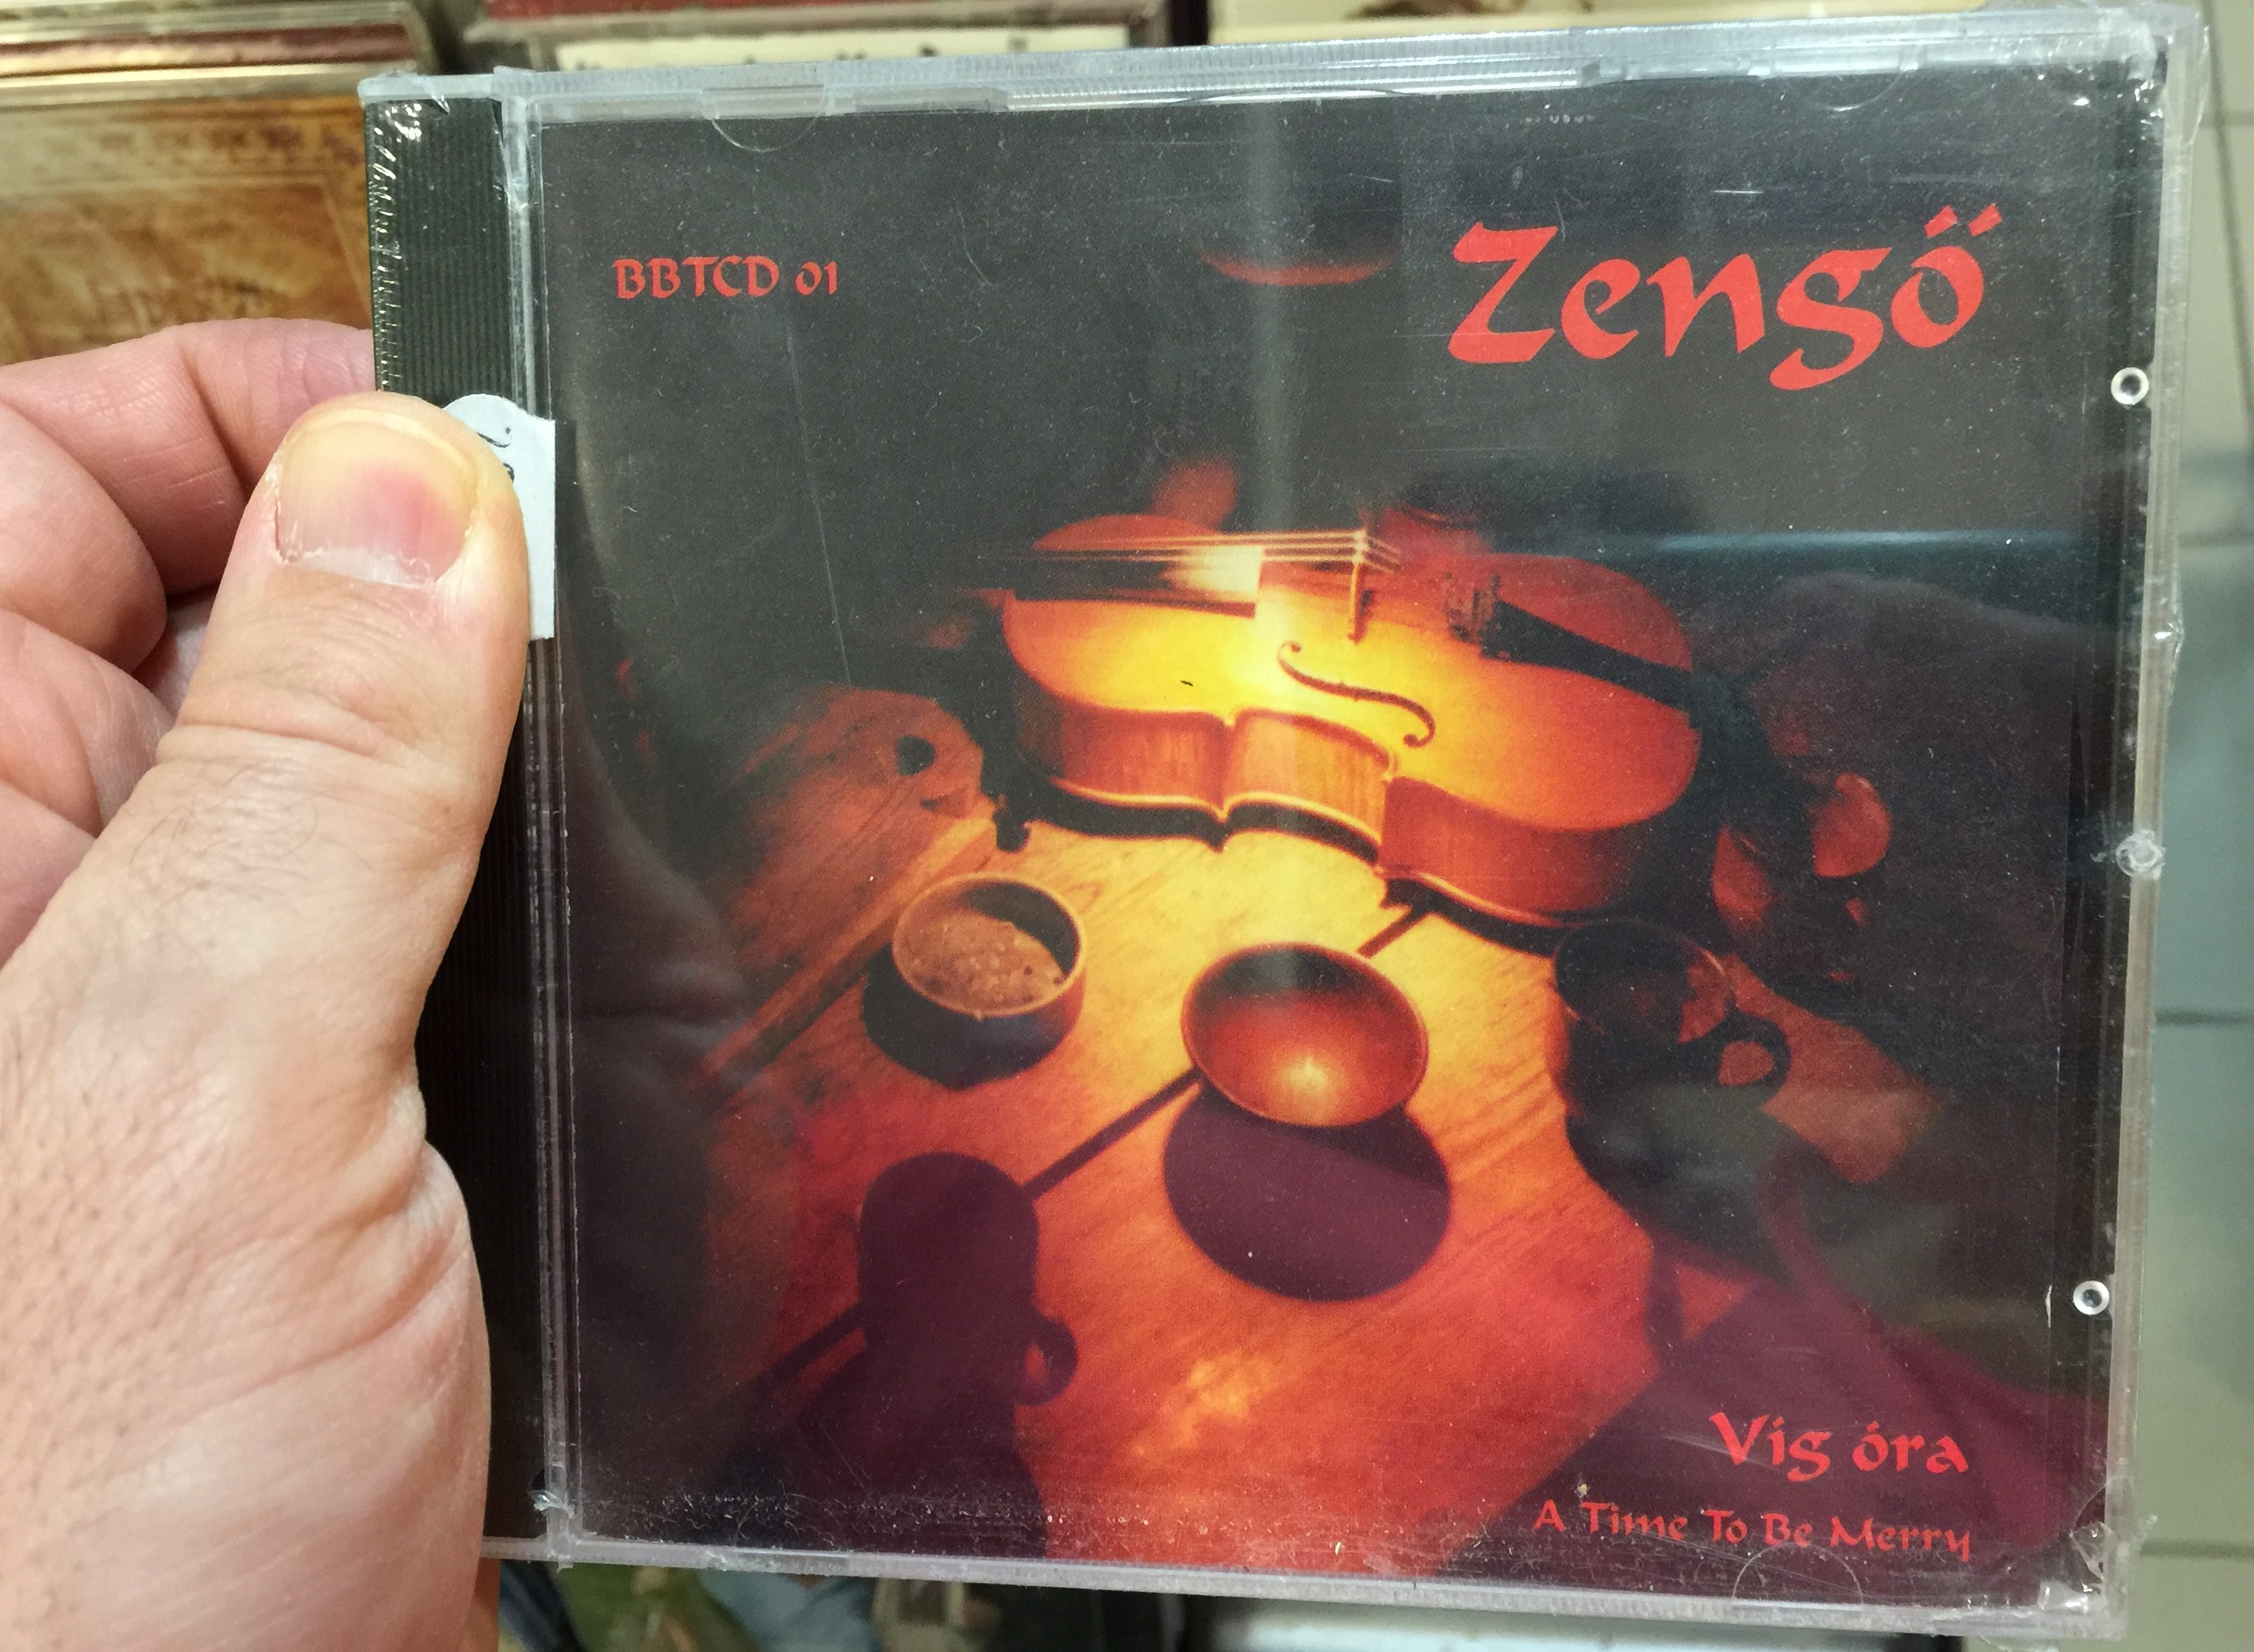 zeng-v-g-ra-a-time-to-be-merry-not-on-label-zeng-self-released-audio-cd-1999-bbtcd-01-1-.jpg